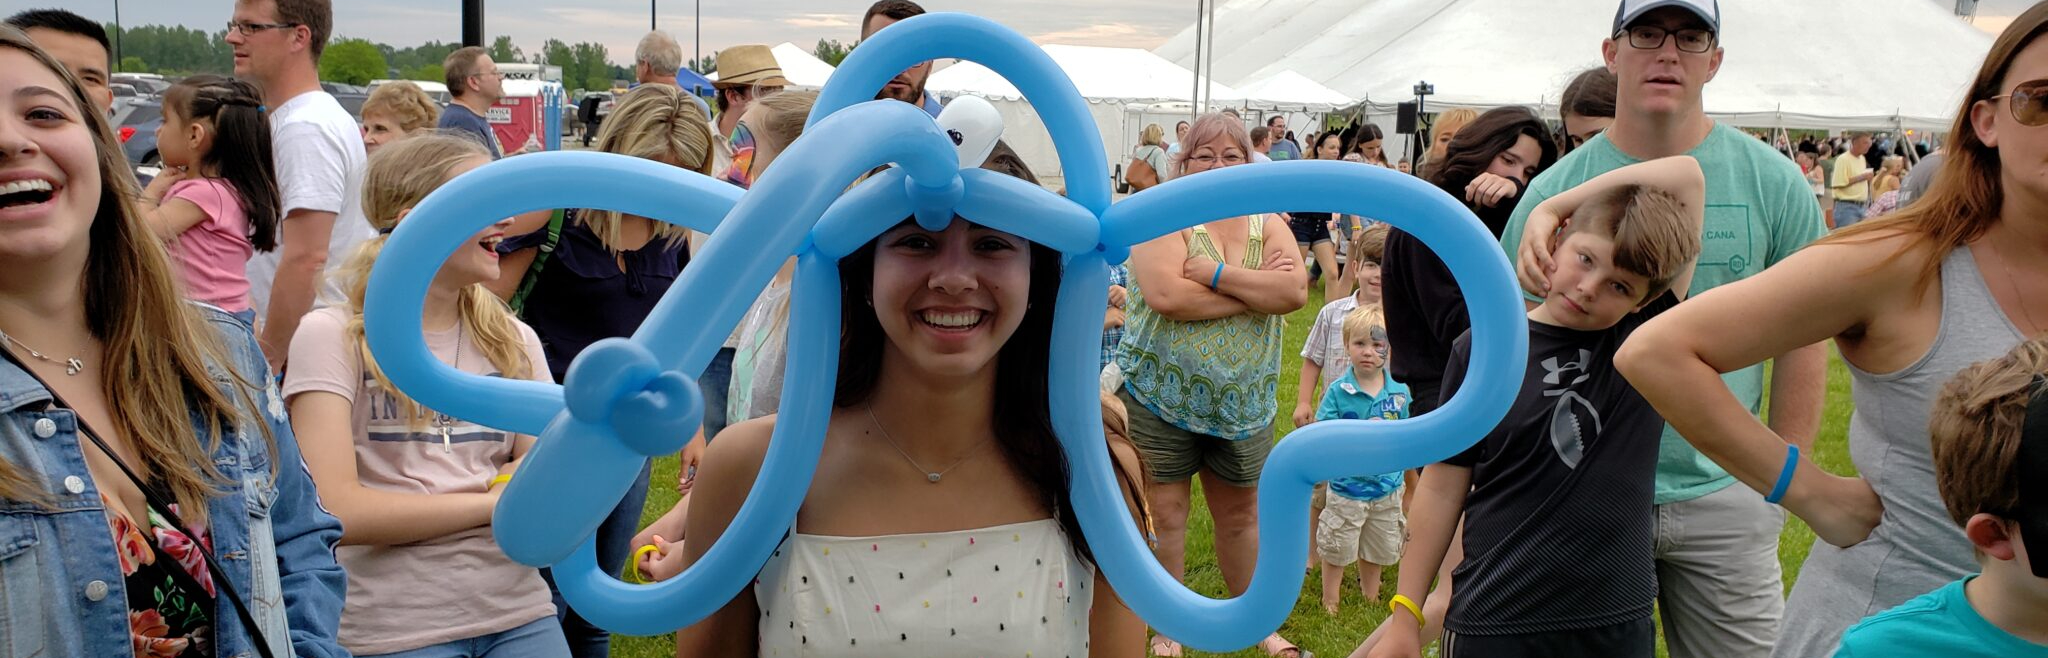 Elephant Balloon Hat for a company anniversary party